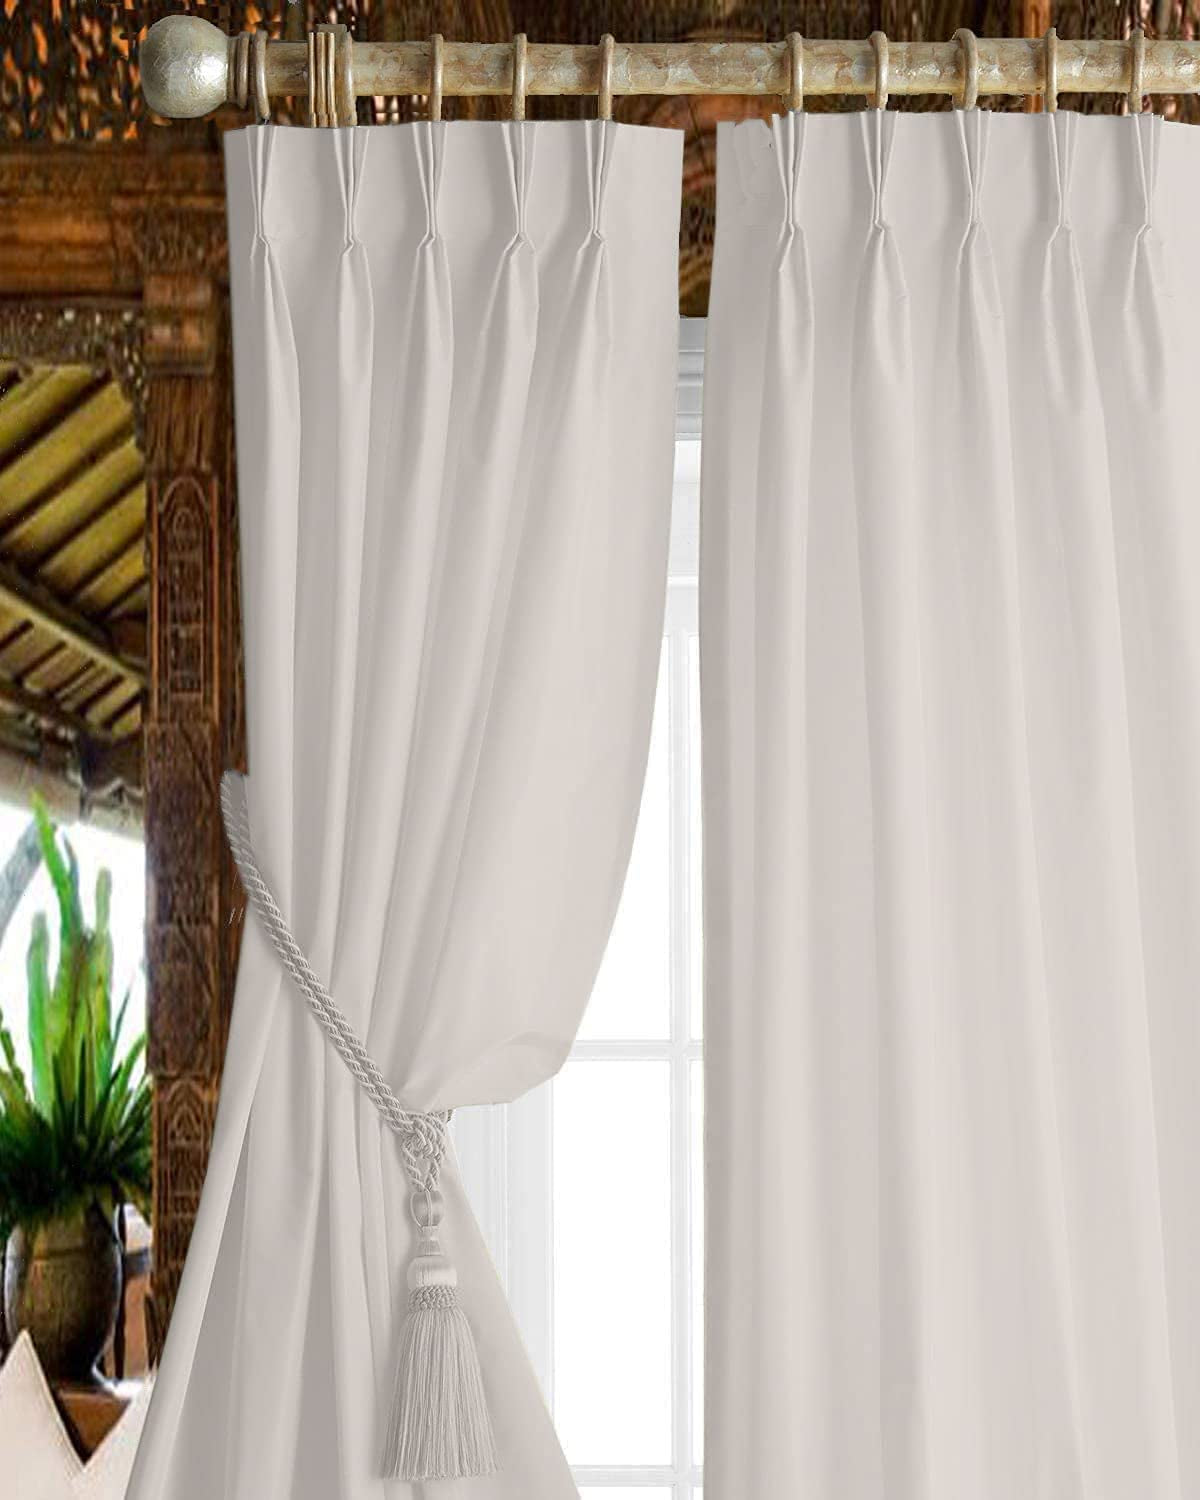 Magic Drapes Pinch Pleated Curtains Triple Pinch Pleat Drapes with Tiebacks & Hooks Blackout Thermal Room Darkening Window Curtains for Living Room, Bedroom, Hall W(26"+26") L45 (2 Panels, Royal Blue)  Magic Drapes Solid - White 52"X 95" 